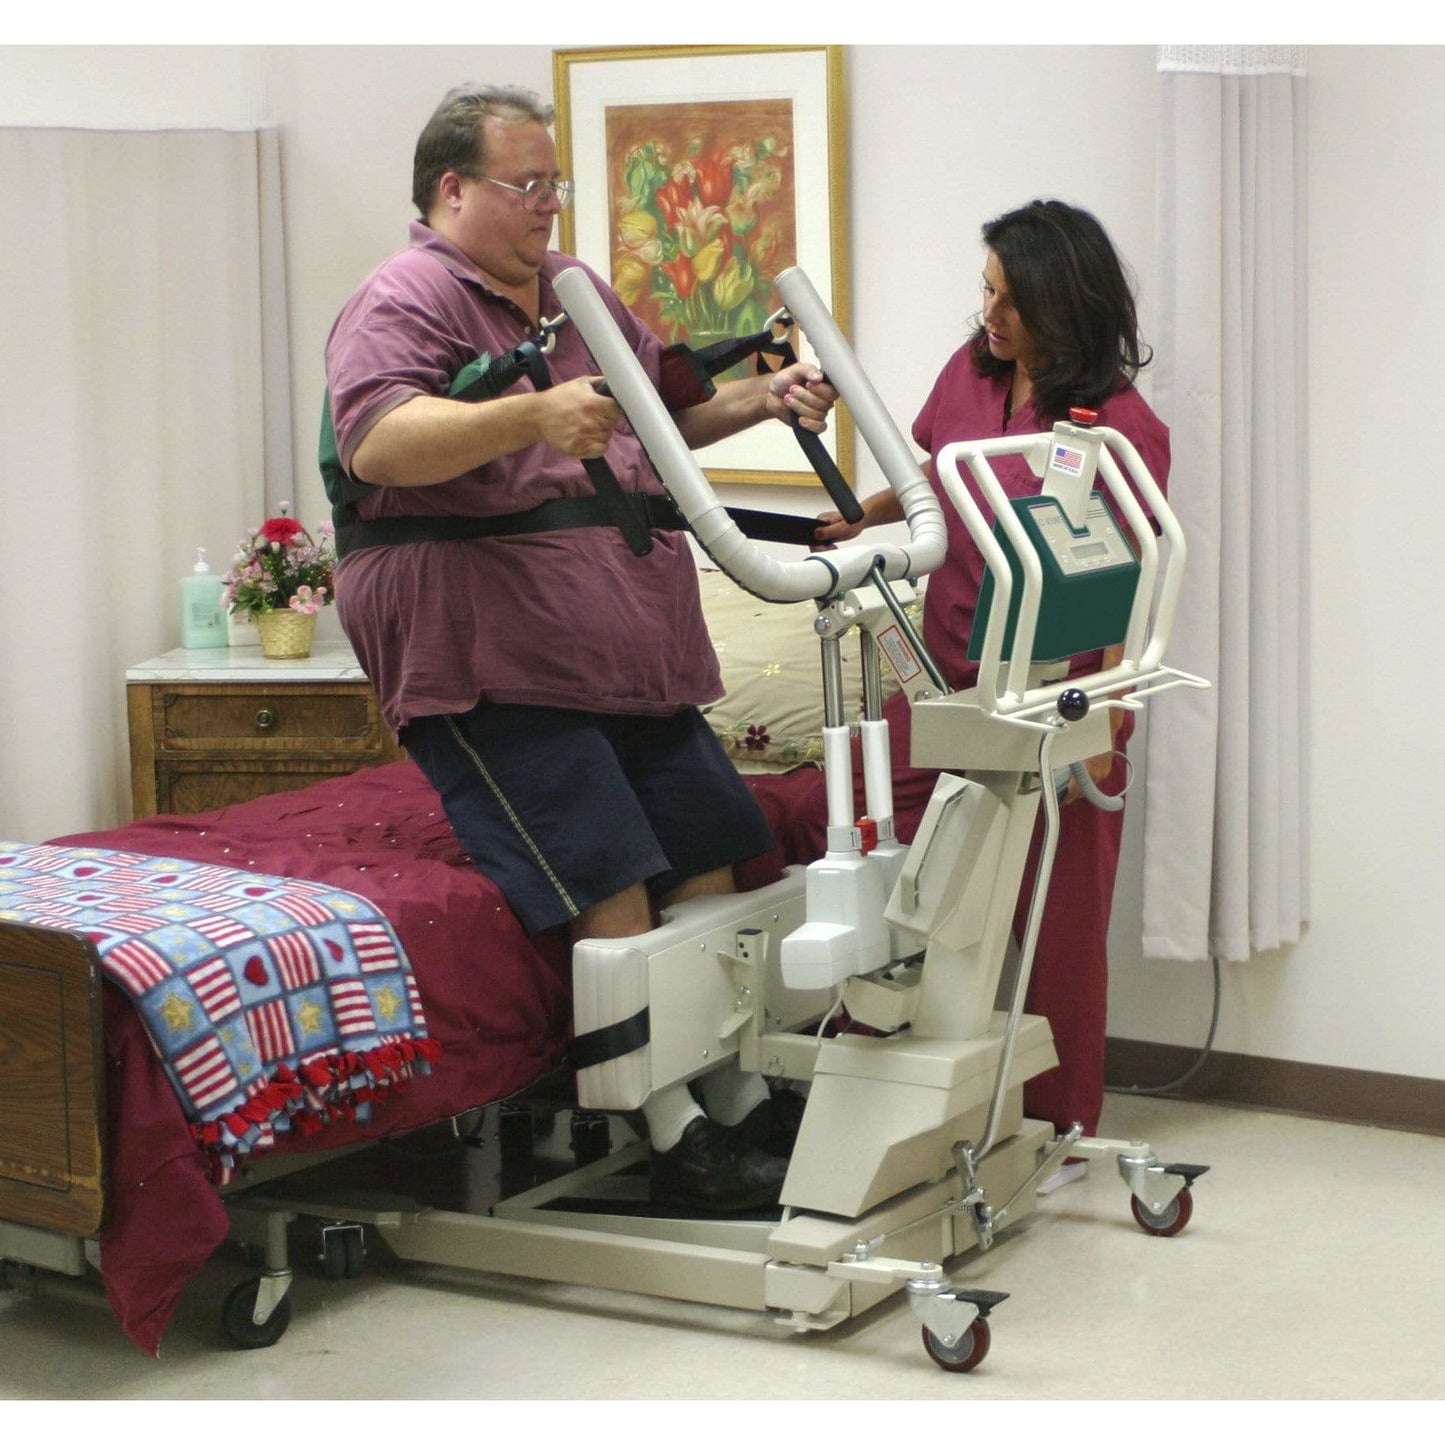 ConvaQuip Sit to Stand Lifts Sit to Stand Patient Lifter with Scale Model S800PS by ConvaQuip